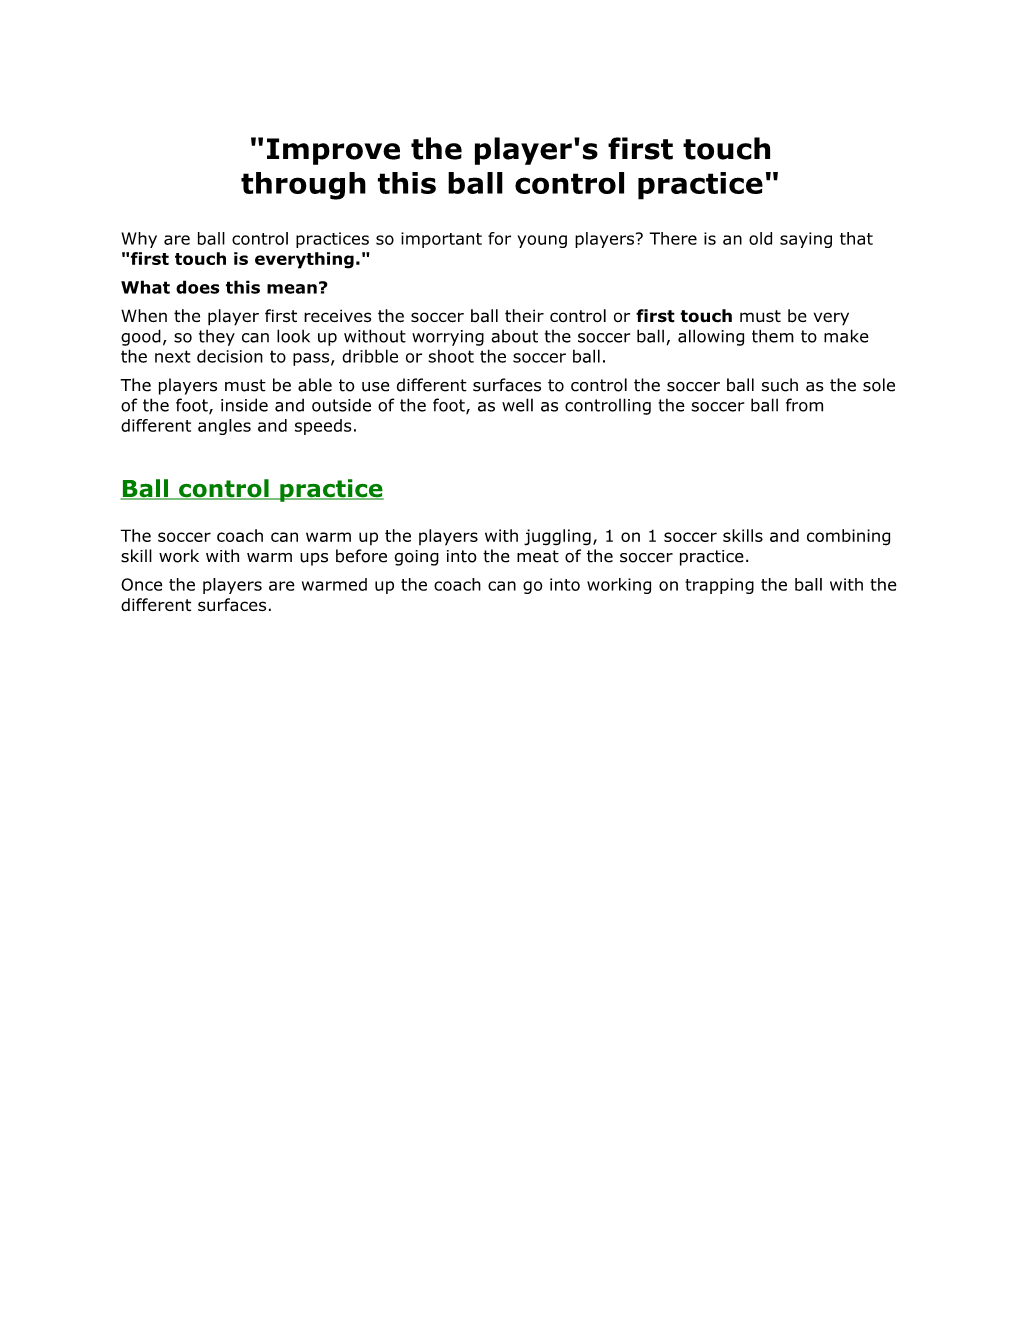 Improve the Player's First Touch Through This Ball Control Practice